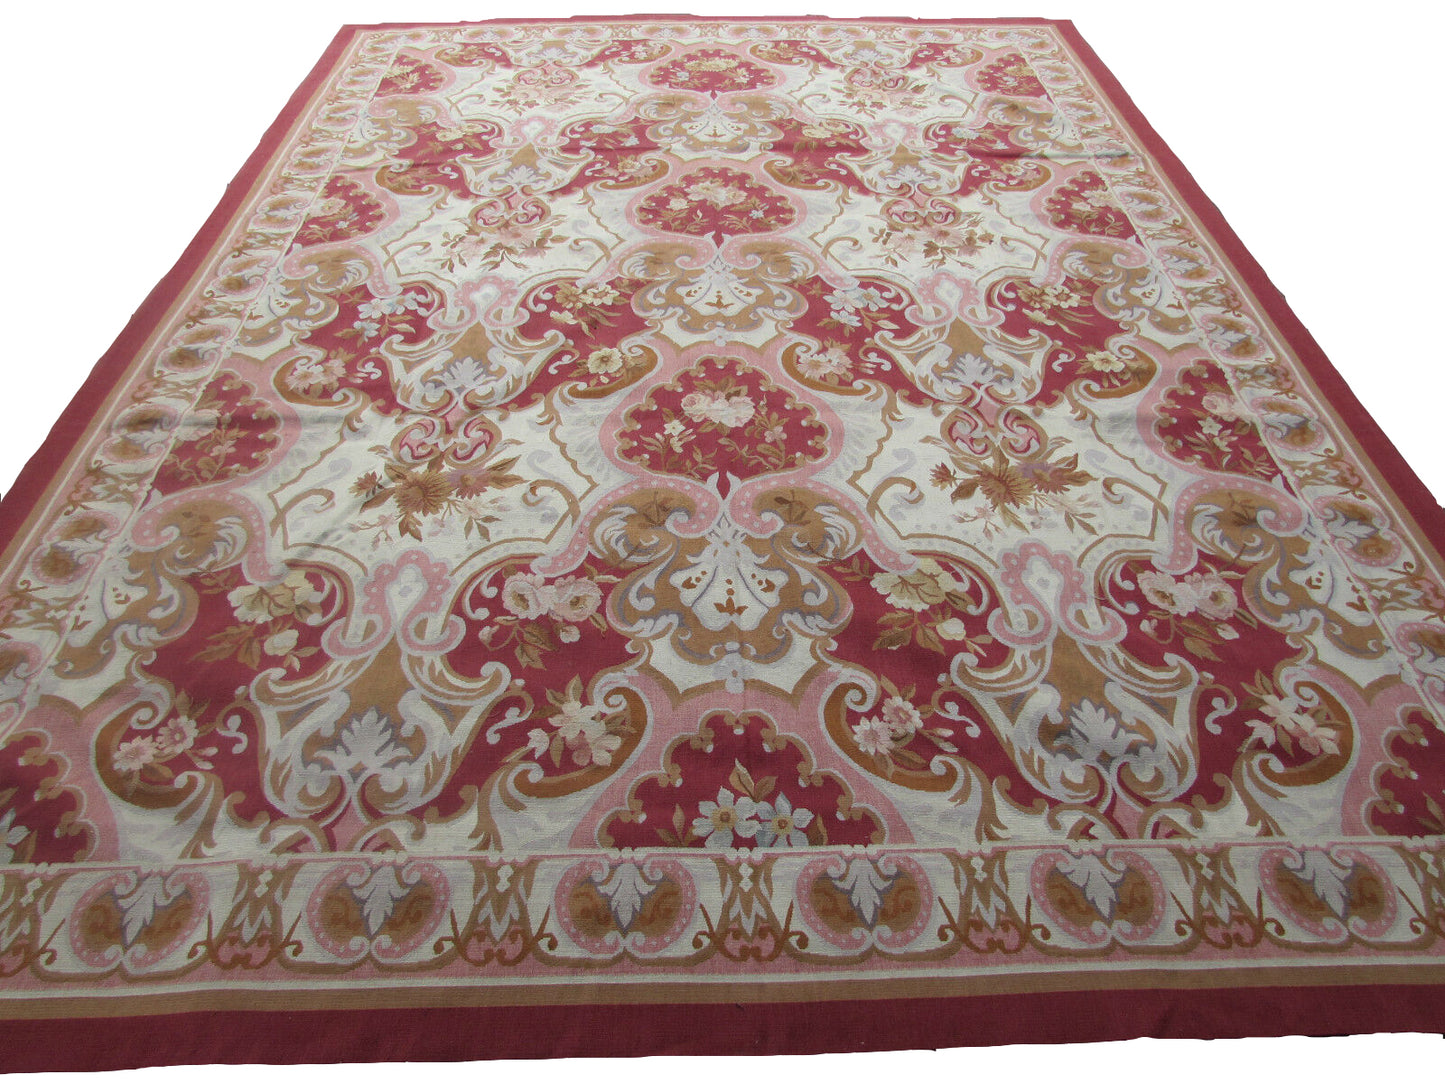  Handmade Vintage French Aubusson Rug in Red, Beige and Olive Brown Colors, 8.9' x 12'